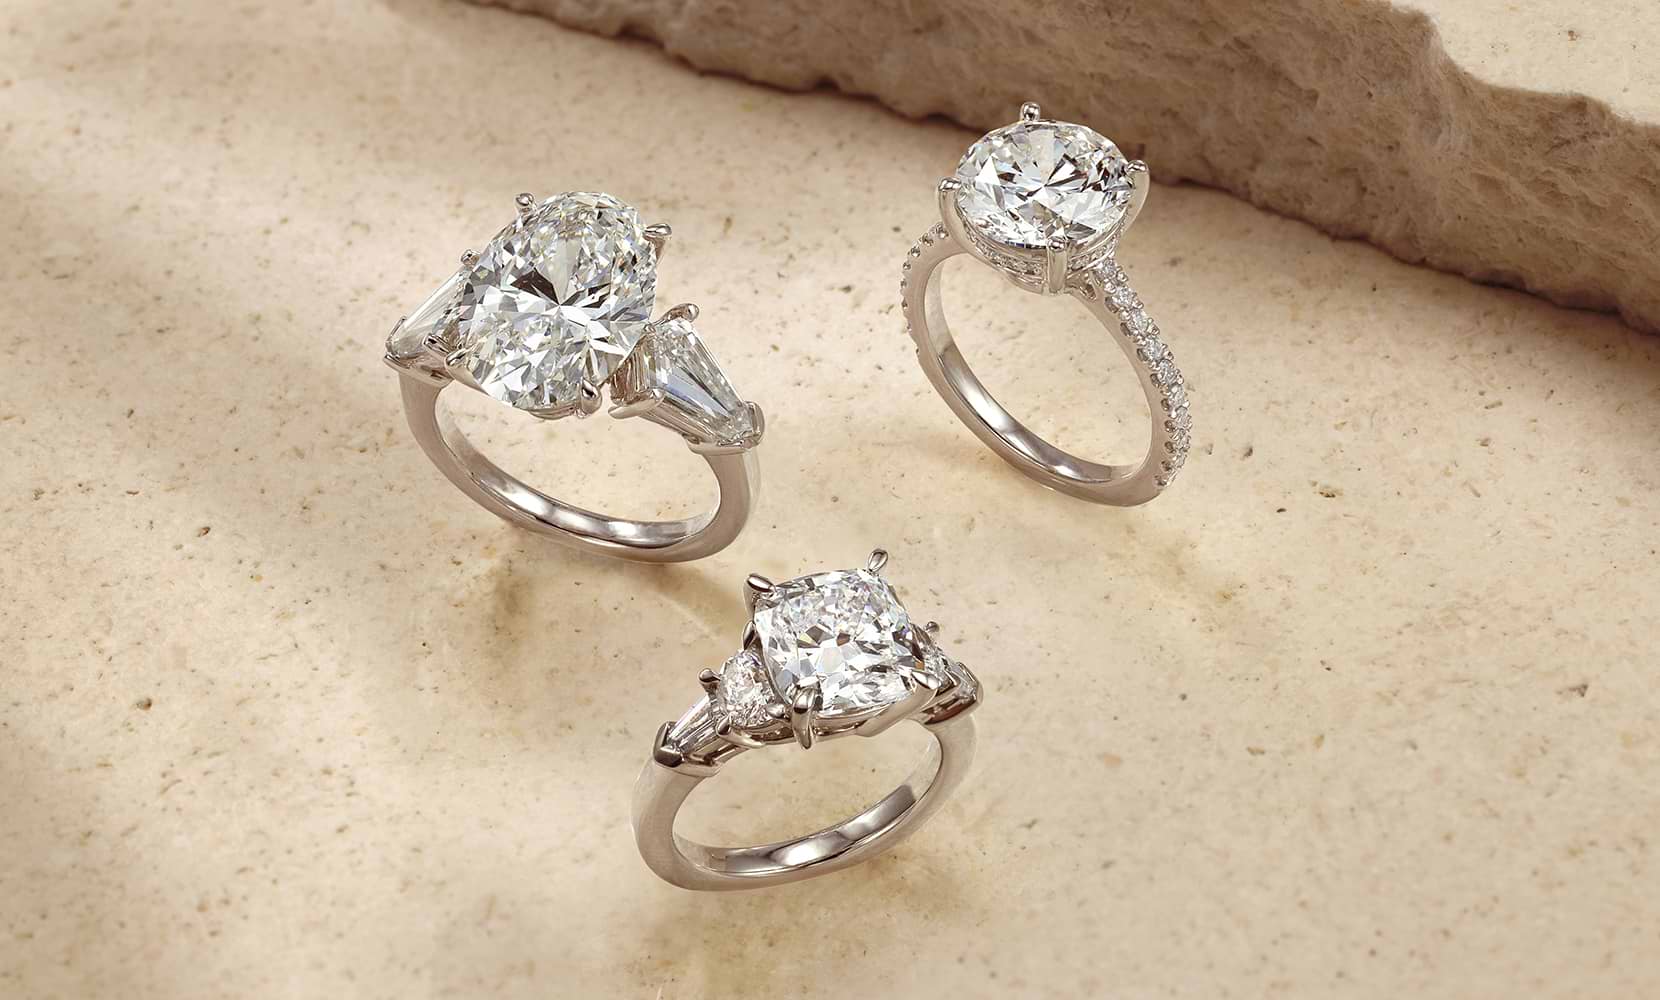 An image of three different engagement ring styles